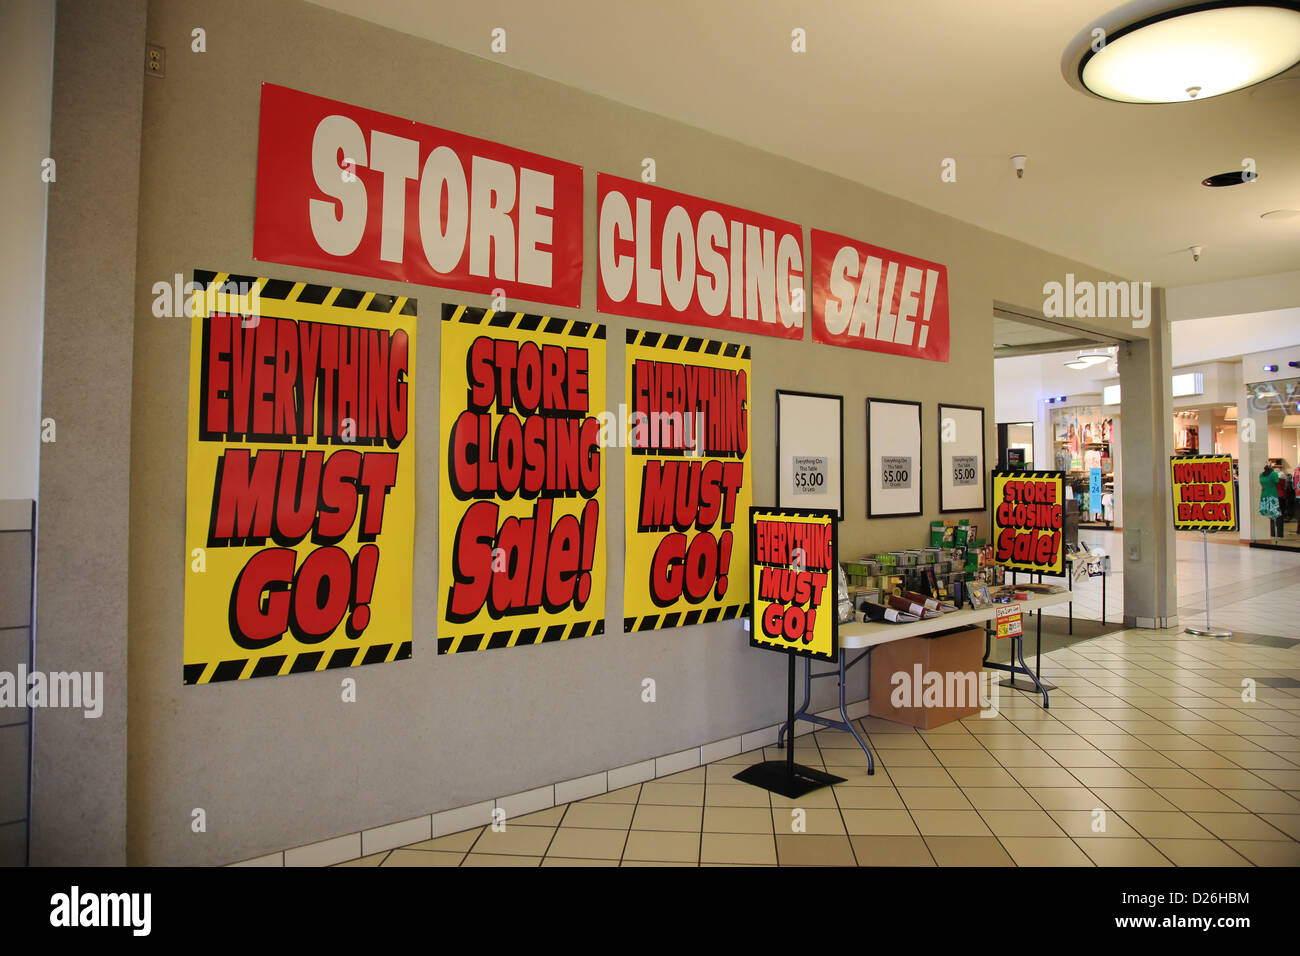 Store closing signs in mall Stock Photo